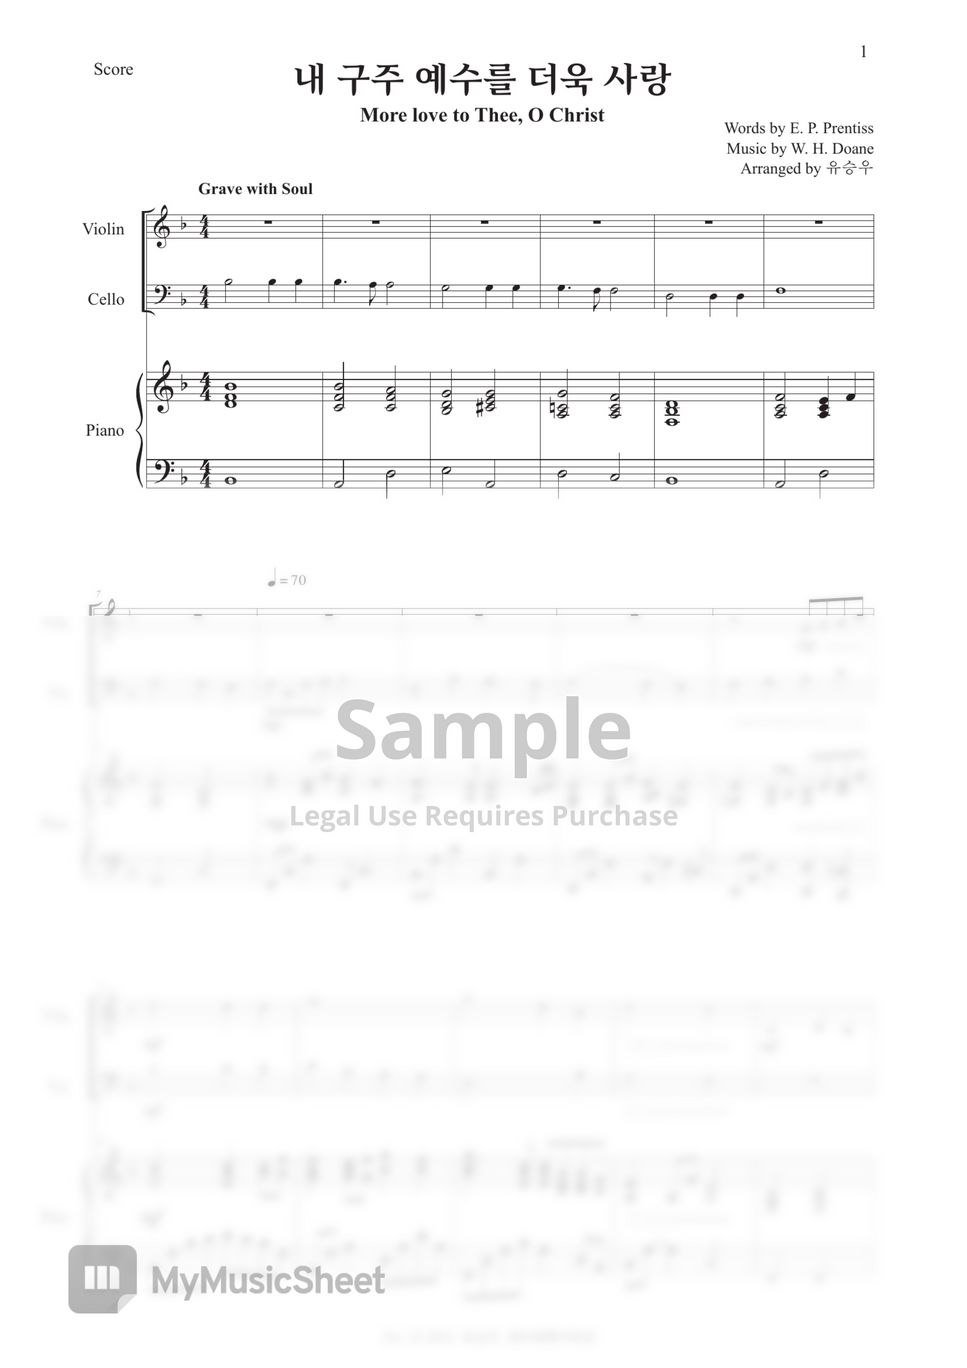 Hyanggi Trio - 내 구주 예수를 더욱 사랑(More love to Thee, O Christ) (Piano Trio) by Seungwoo Yoo